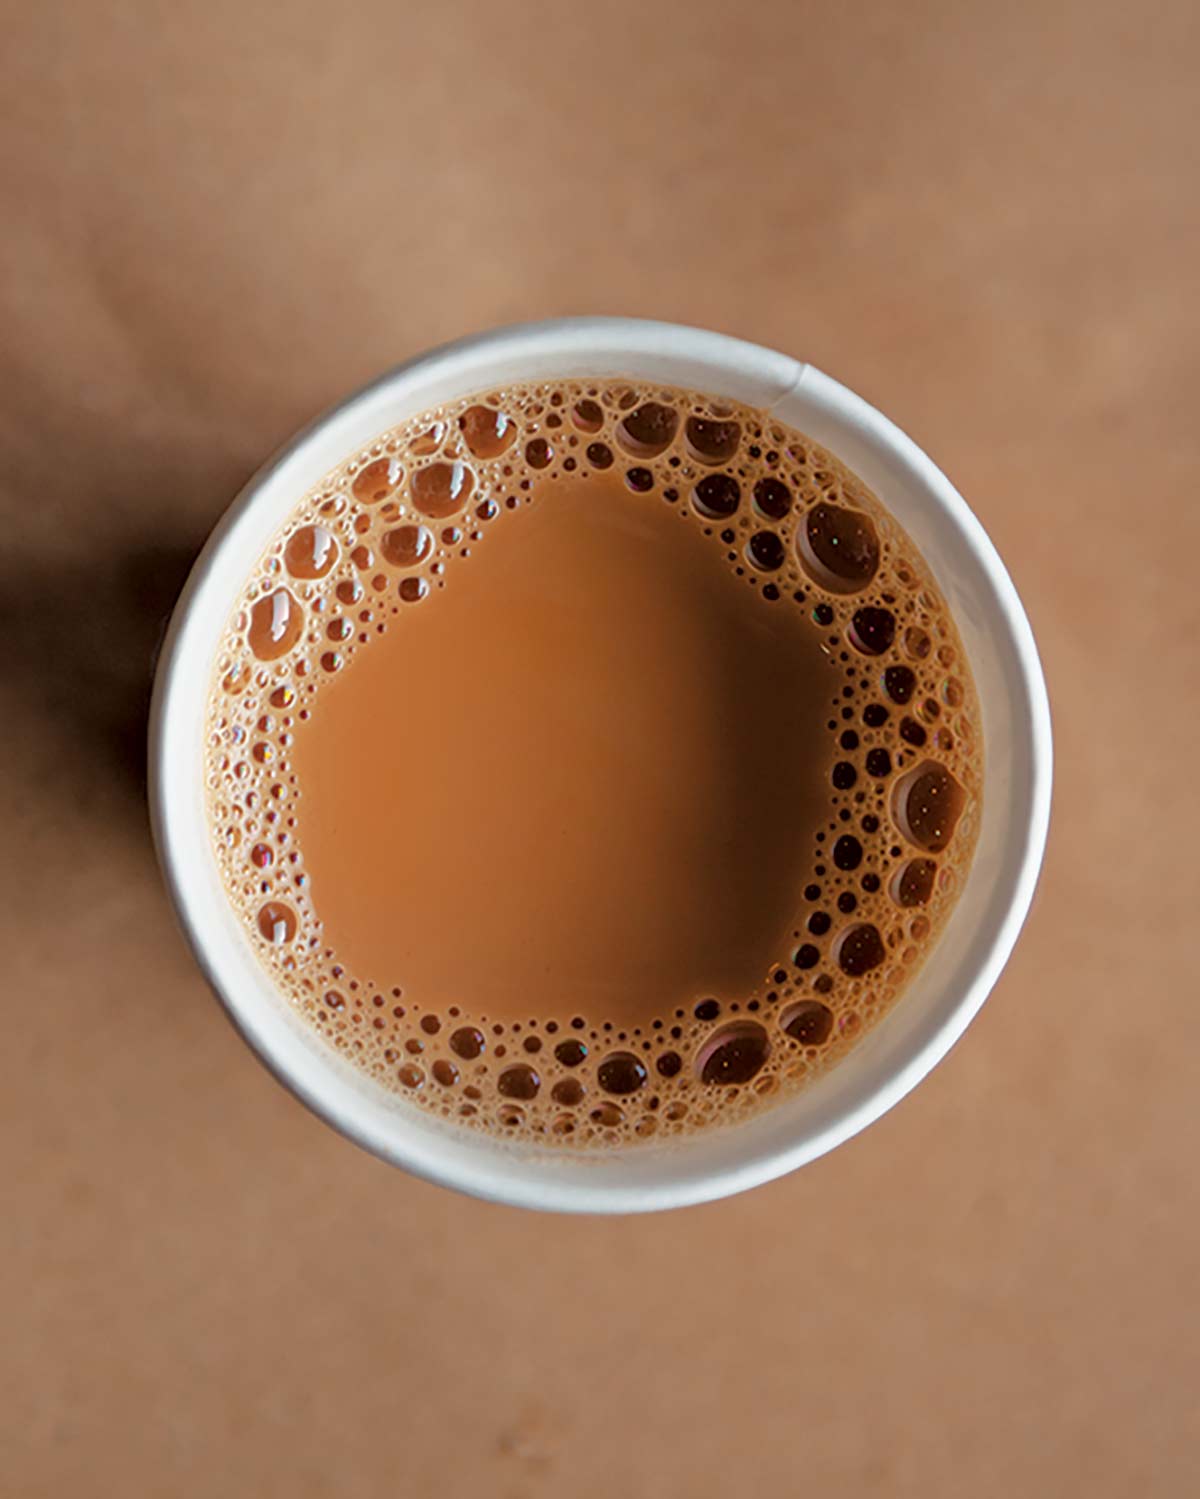 A cup of tea with milk in it on a brown background.